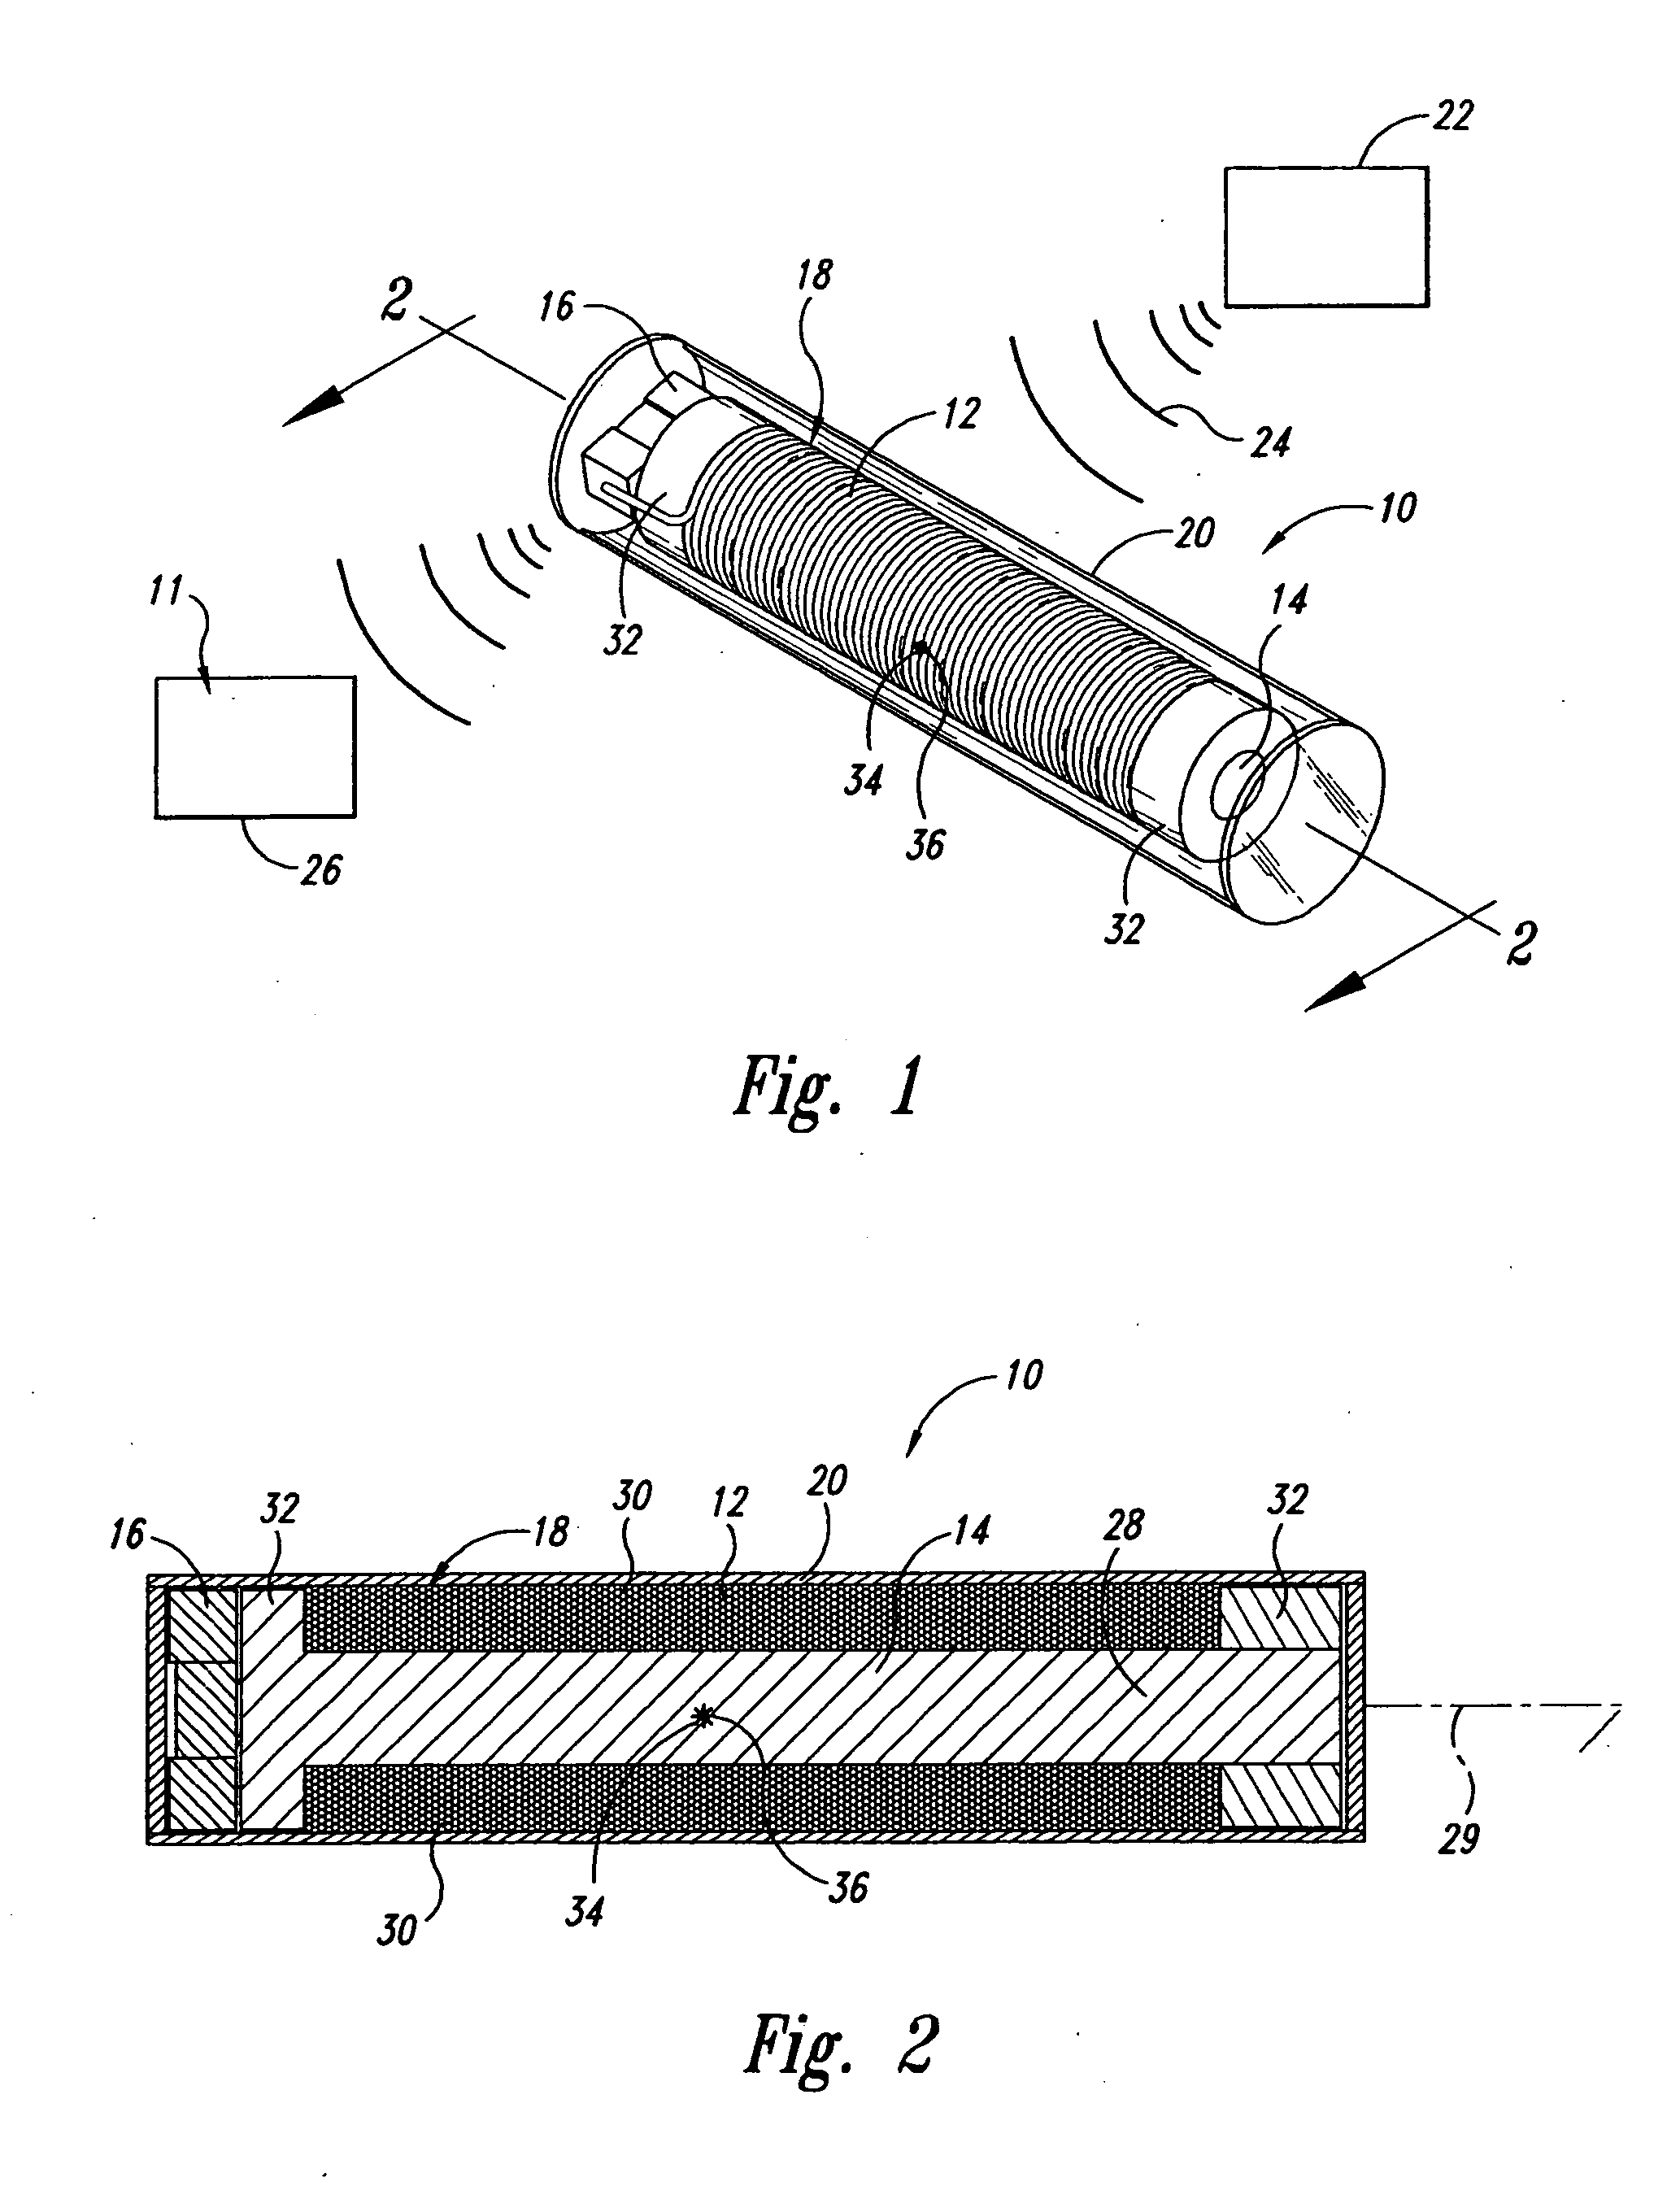 Miniature resonating marker assembly